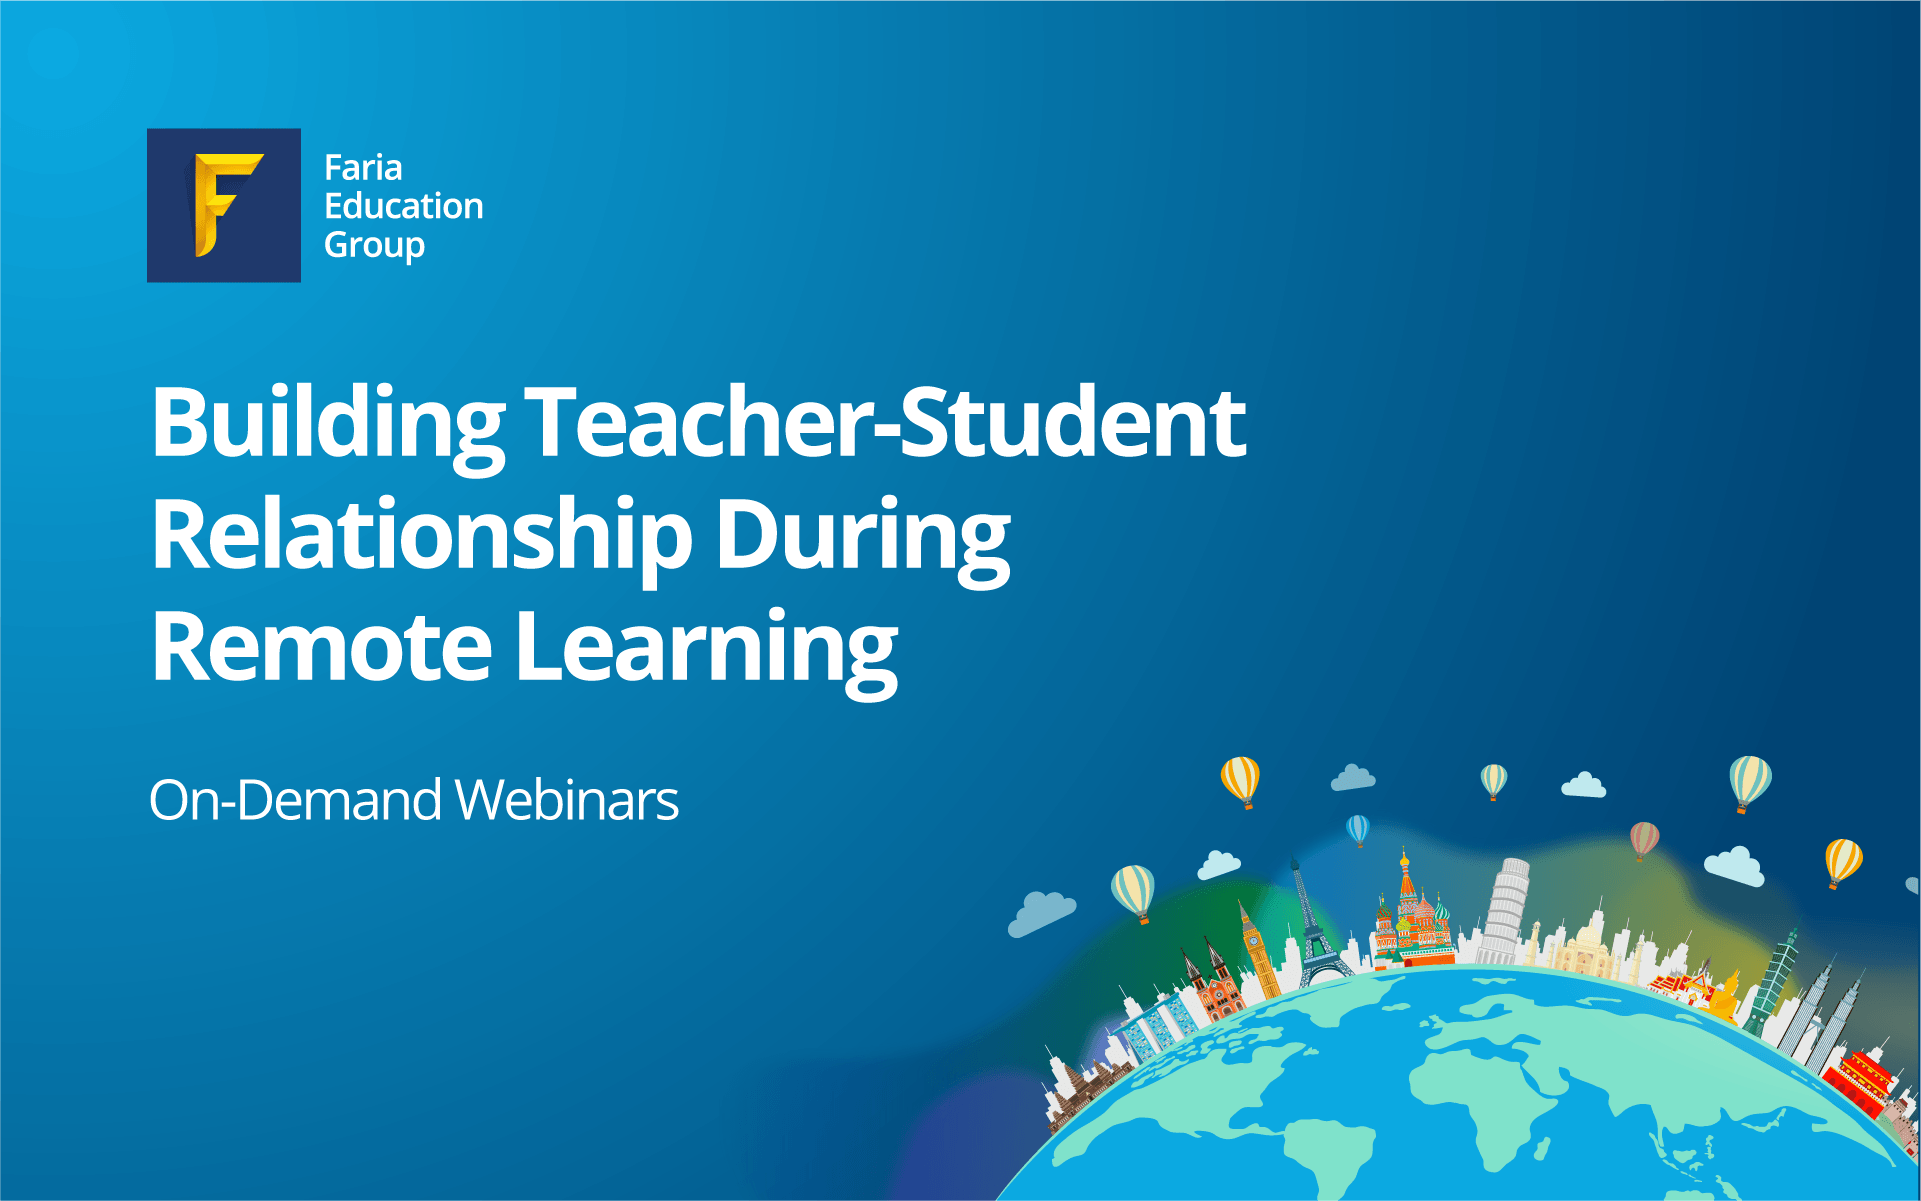 Building Teacher-student Relationships During Remote Learning